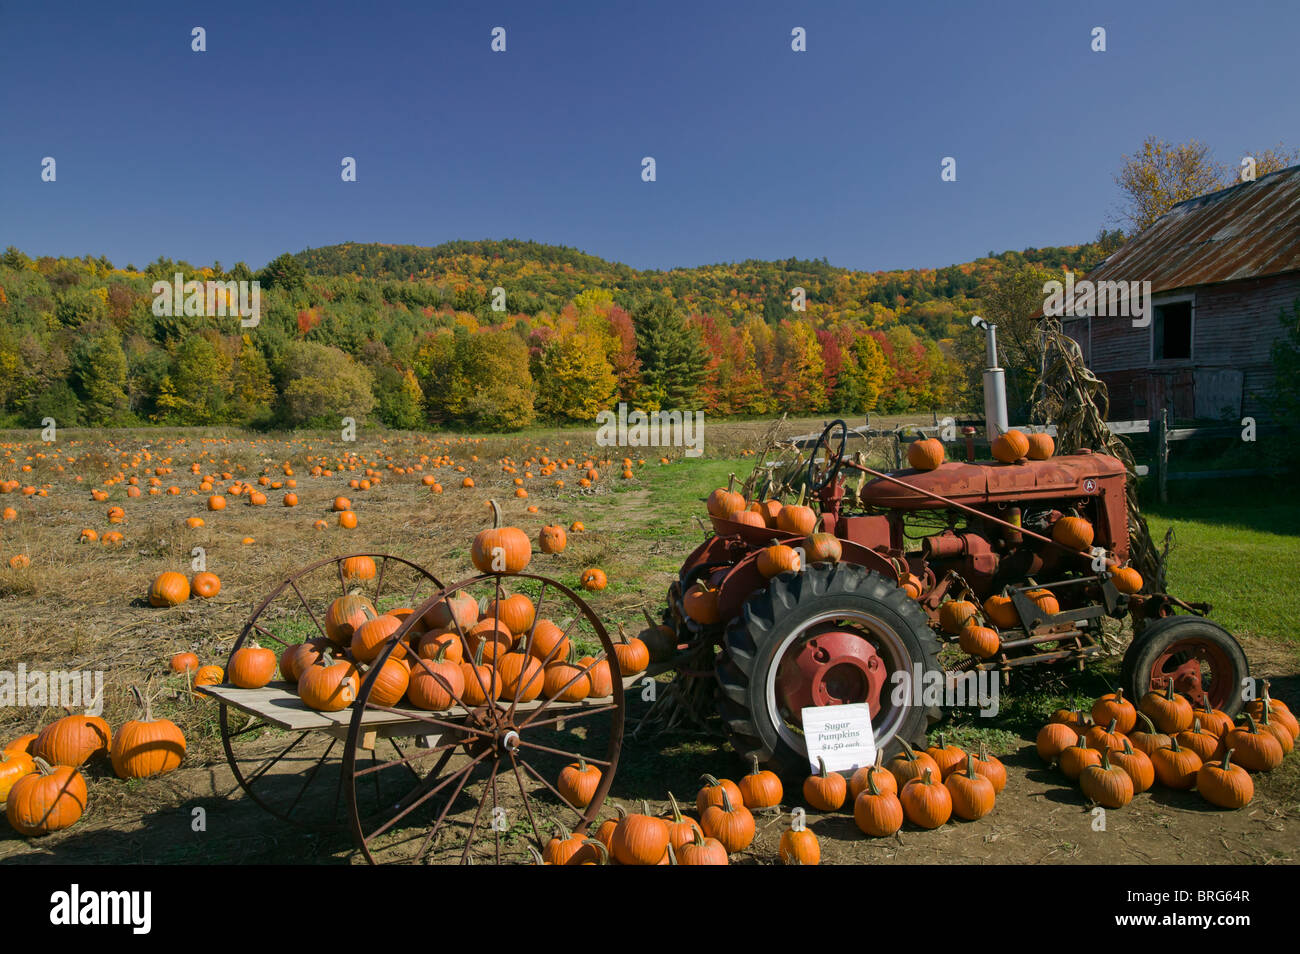 A Self Picking Pumpkin Patch And Field Surrounded By Fall Foliage In